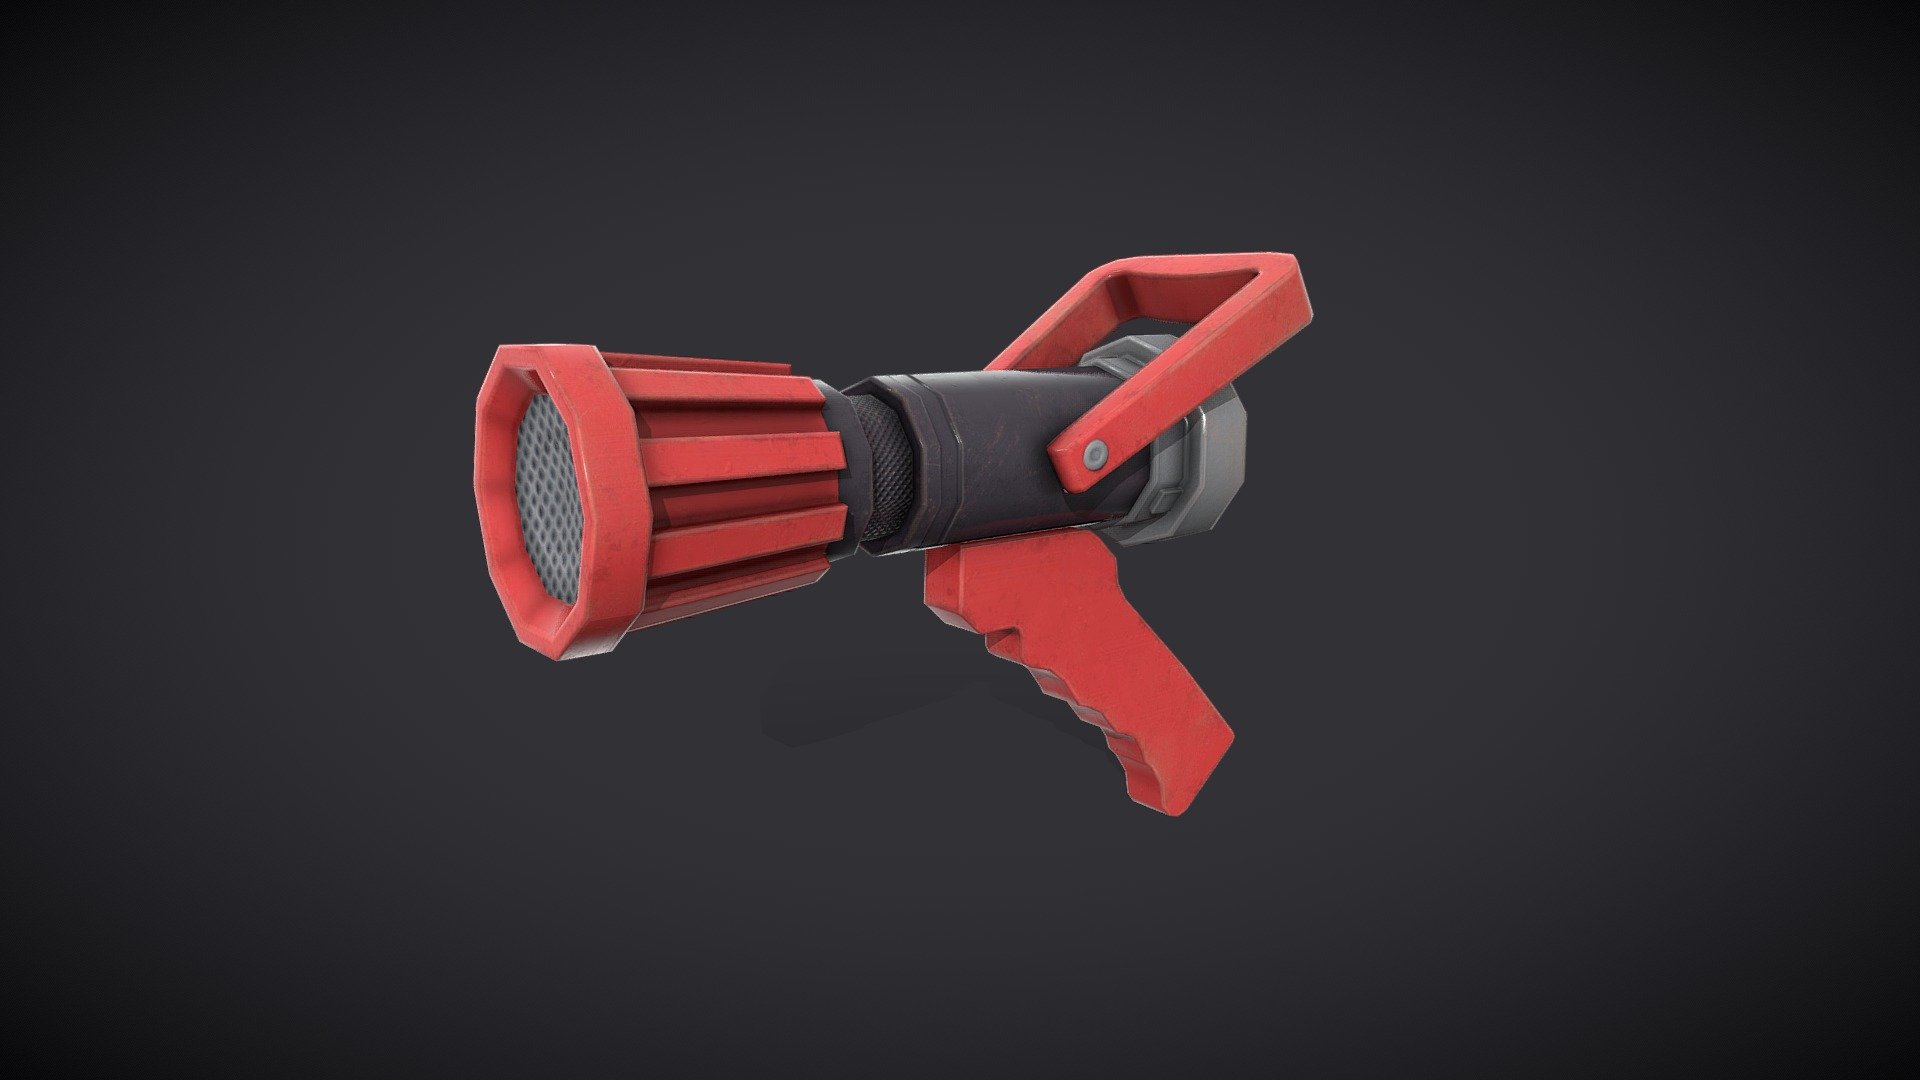 Fire Hose



Dimensions : 0.107m x 0.229m x 0.295m

Texture : PBR, 2048

Files Include : Textures, GLB

Usage : VR, Game ready

.............

OVA’s flagship software, StellarX, allows those with no programming or coding knowledge to place 3D goods and create immersive experiences through simple drag-and-drop actions. 

Storytelling, which involves a series of interactions, sequences, and triggers are easily created through OVA’s patent-pending visual scripting tool. 

.............

**Download StellarX on the Meta Quest Store: oculus.com/experiences/quest/8132958546745663
**

**Download StellarX on Steam: store.steampowered.com/app/1214640/StellarX
**

Have a bigger immersive project in mind? Get in touch with us! 



StellarX on LinkedIn: linkedin.com/showcase/stellarx-by-ova

Join the StellarX Discord server! 

........

StellarX© 2024 - Fire Hose - Buy Royalty Free 3D model by StellarX 3d model